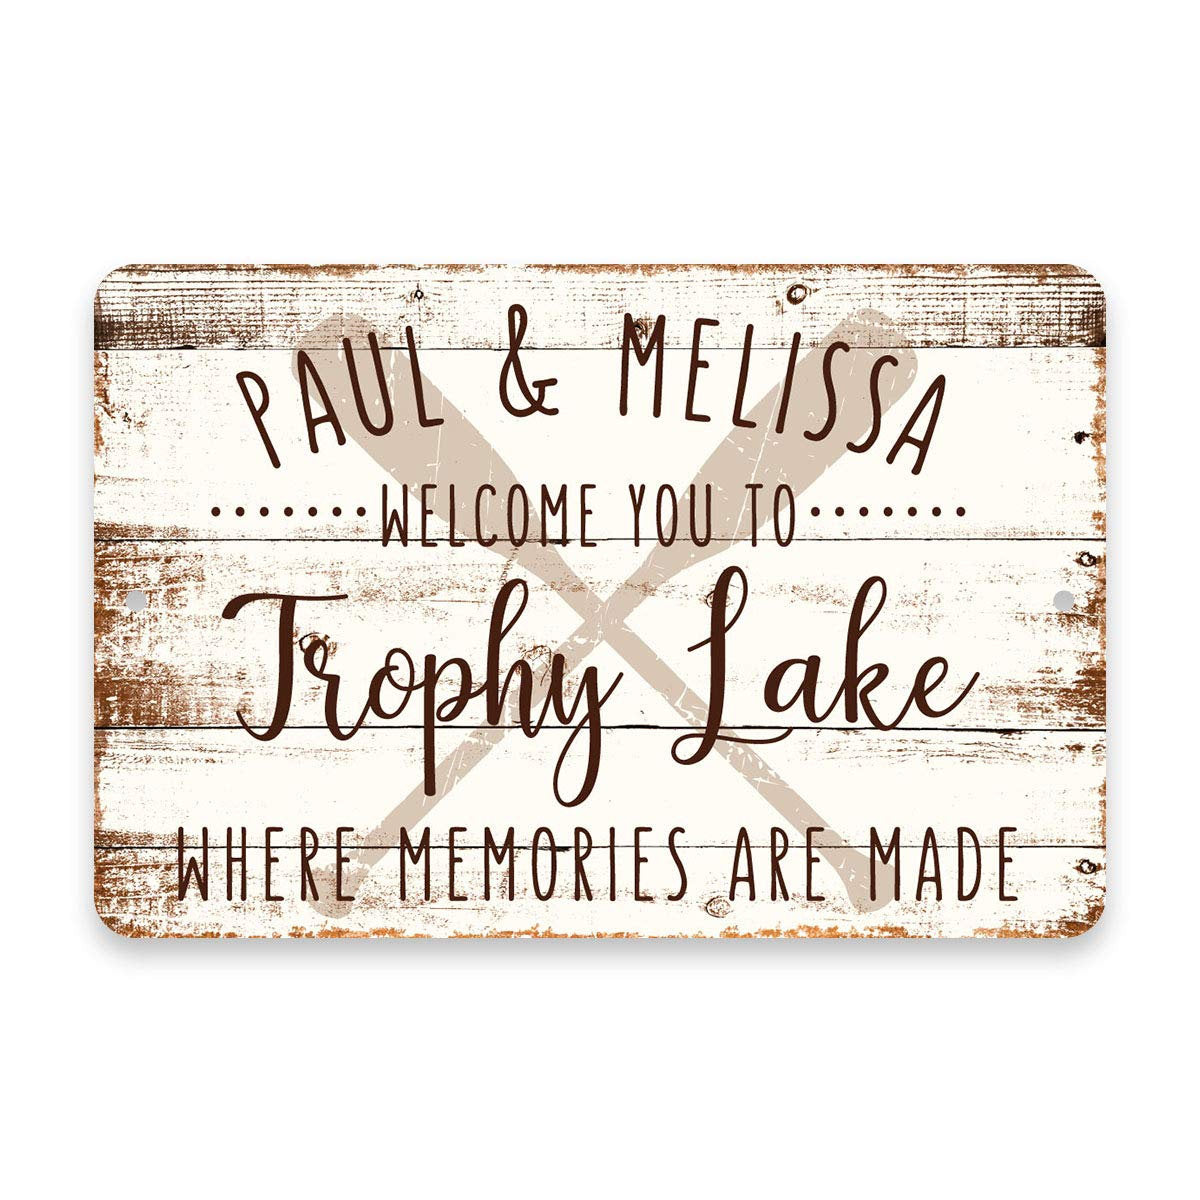 Personalized Welcome to Trophy Lake Where Memories are Made Sign - 8 X 12 Metal Sign with Wood Look